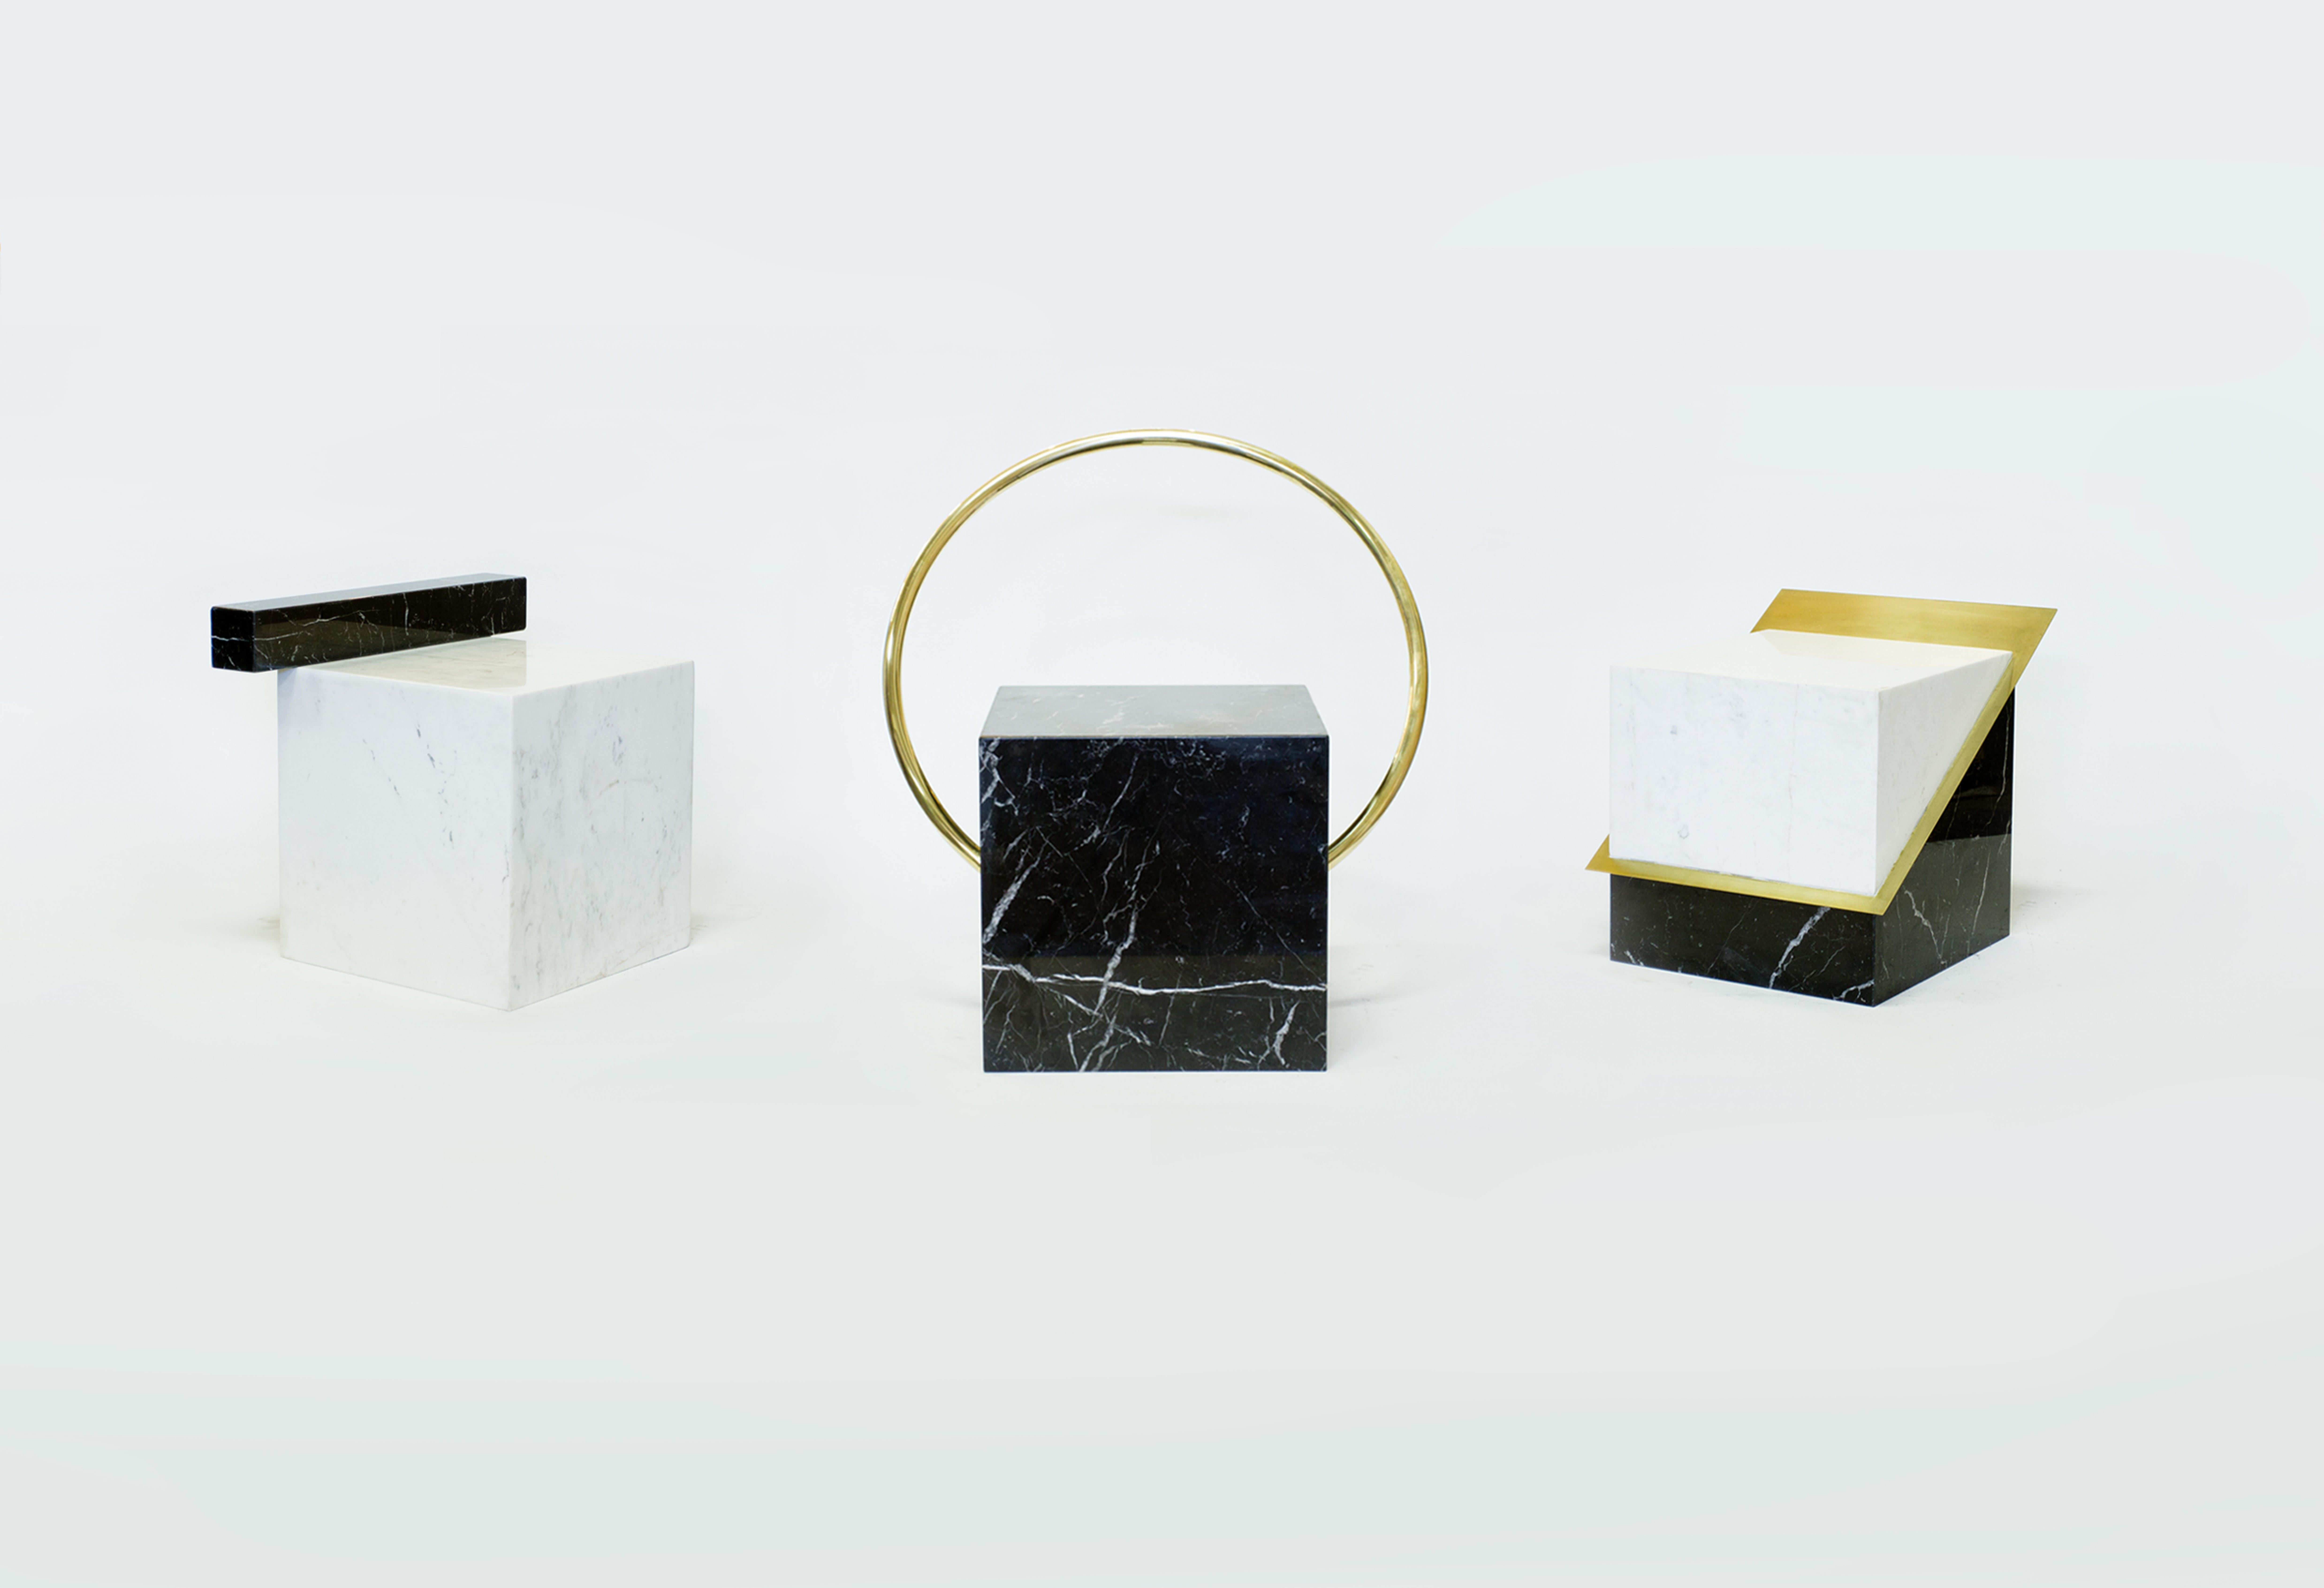 Stool in Black and White Marble and Brass, Limited Edition by O Formigueiro (Brasilianisch) im Angebot